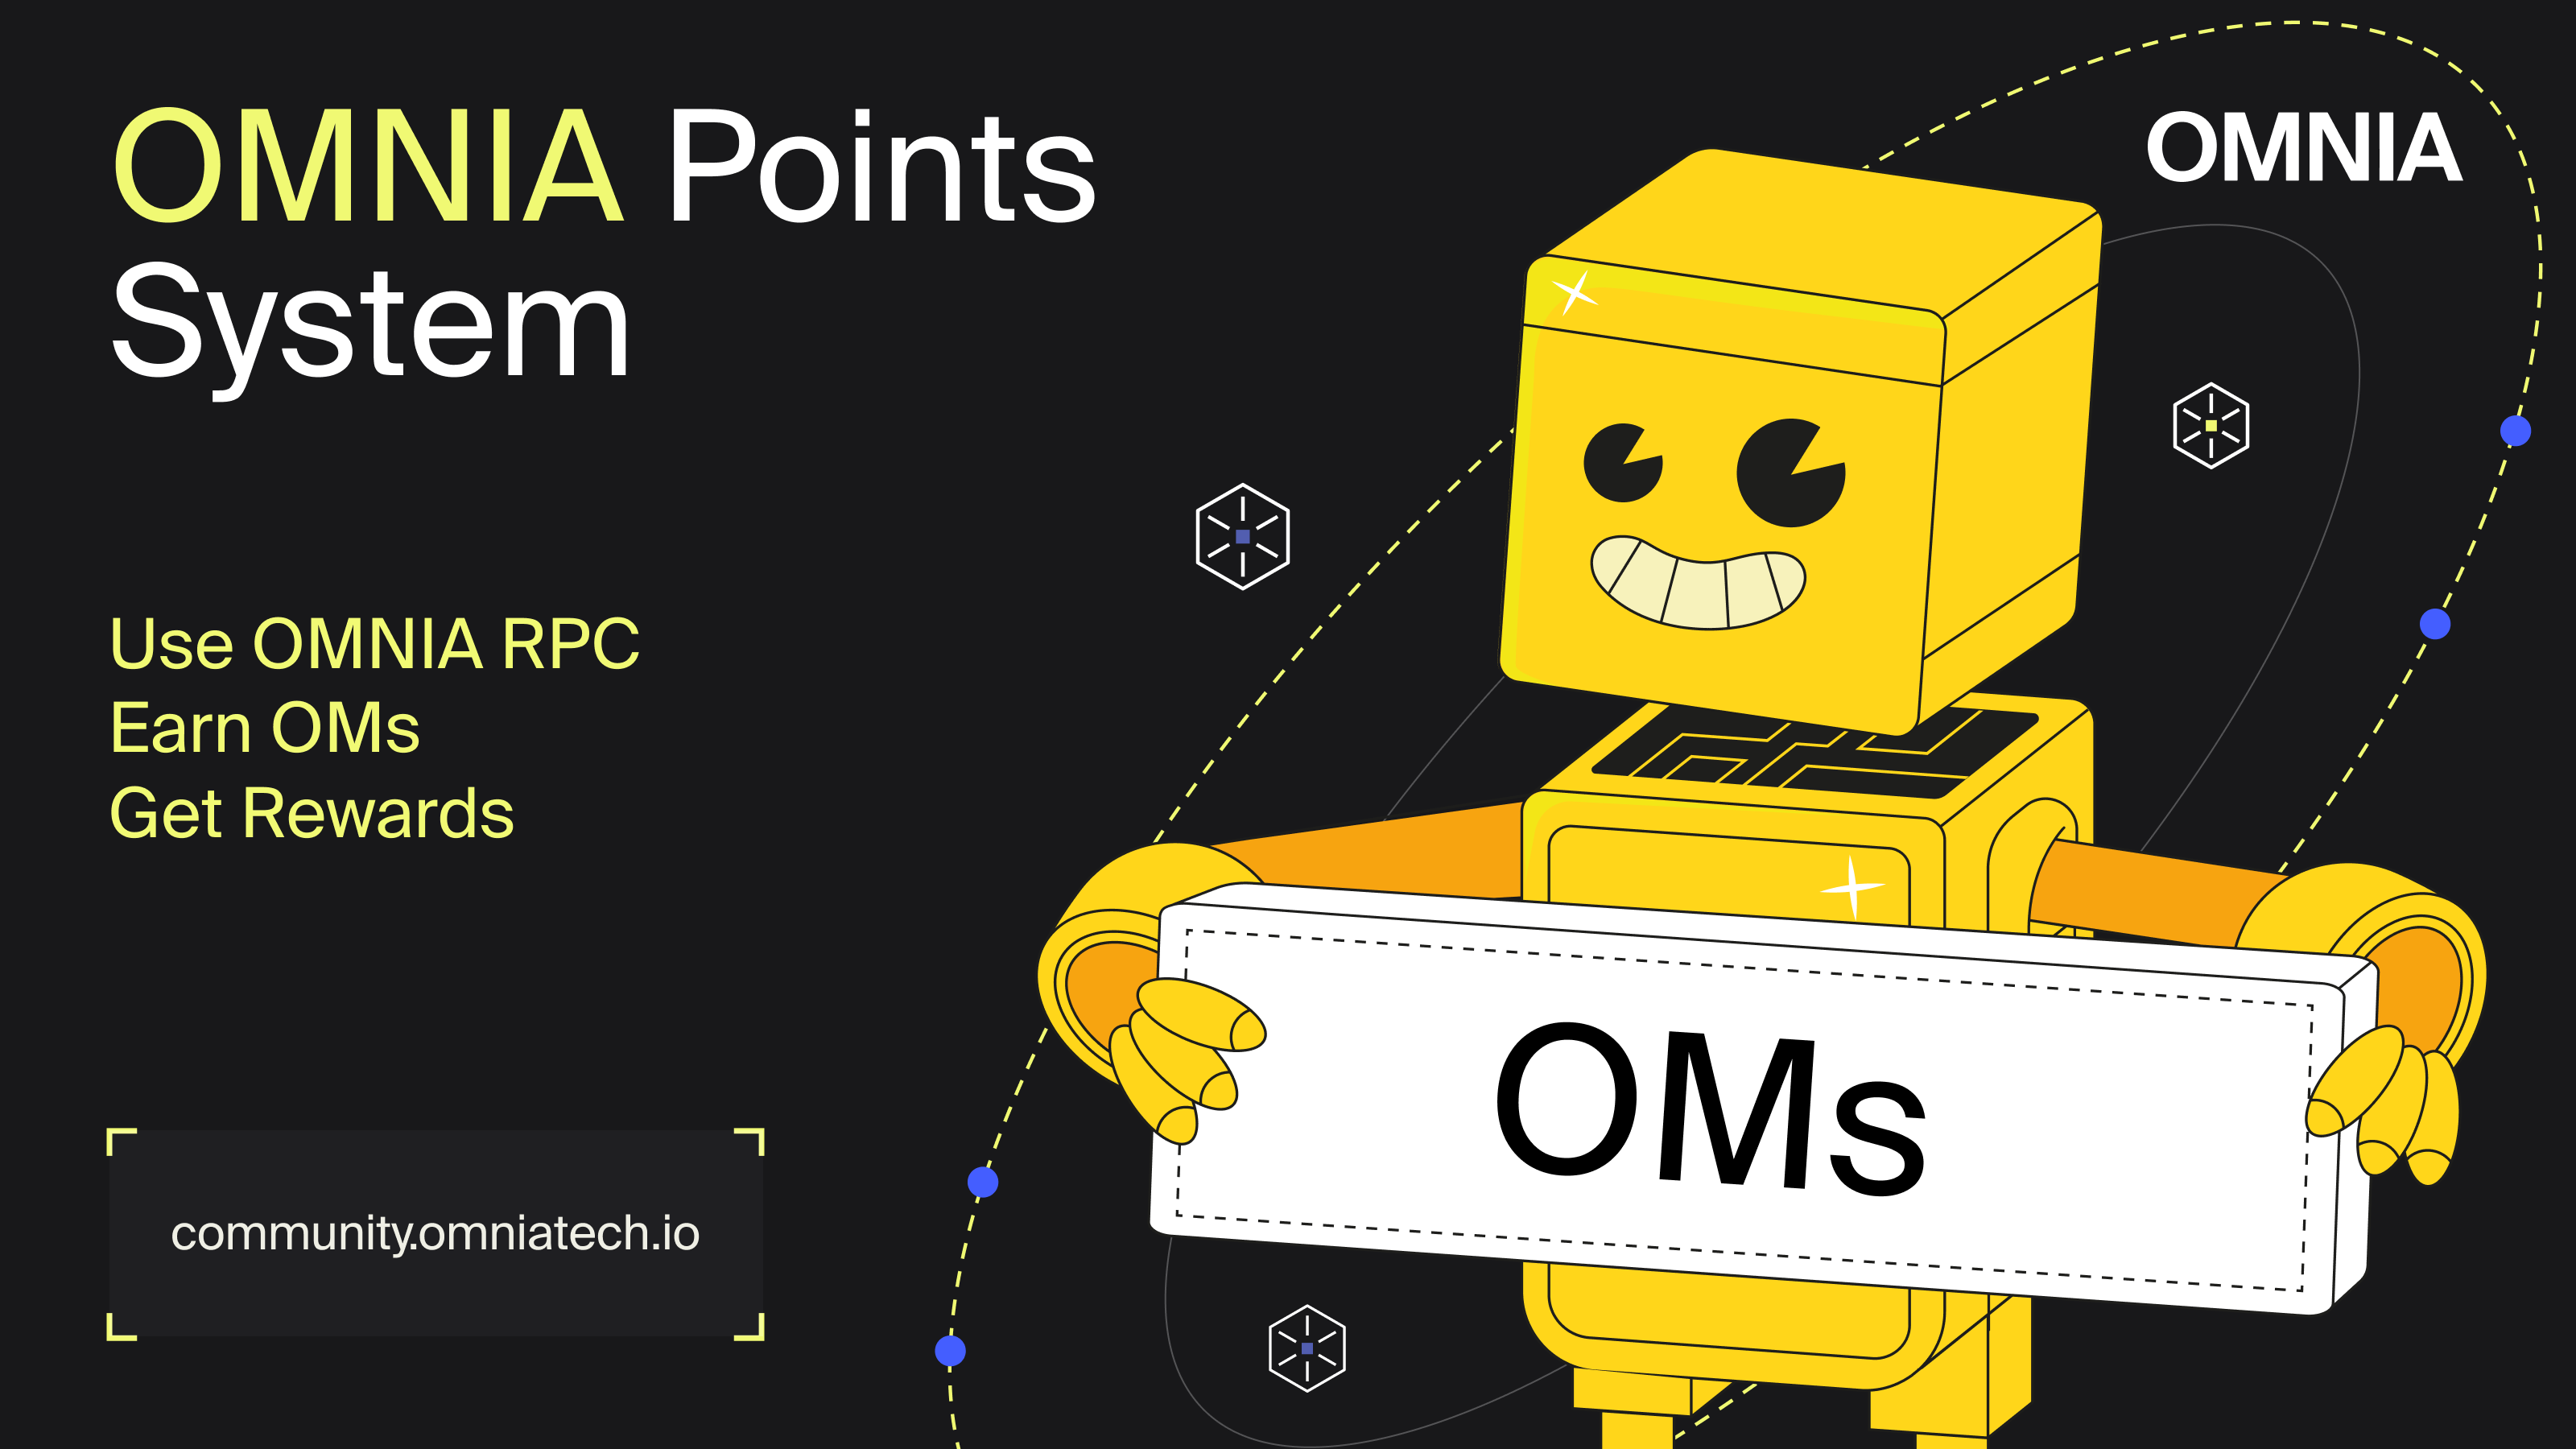 Introducing the OMNIA Points System: OMs